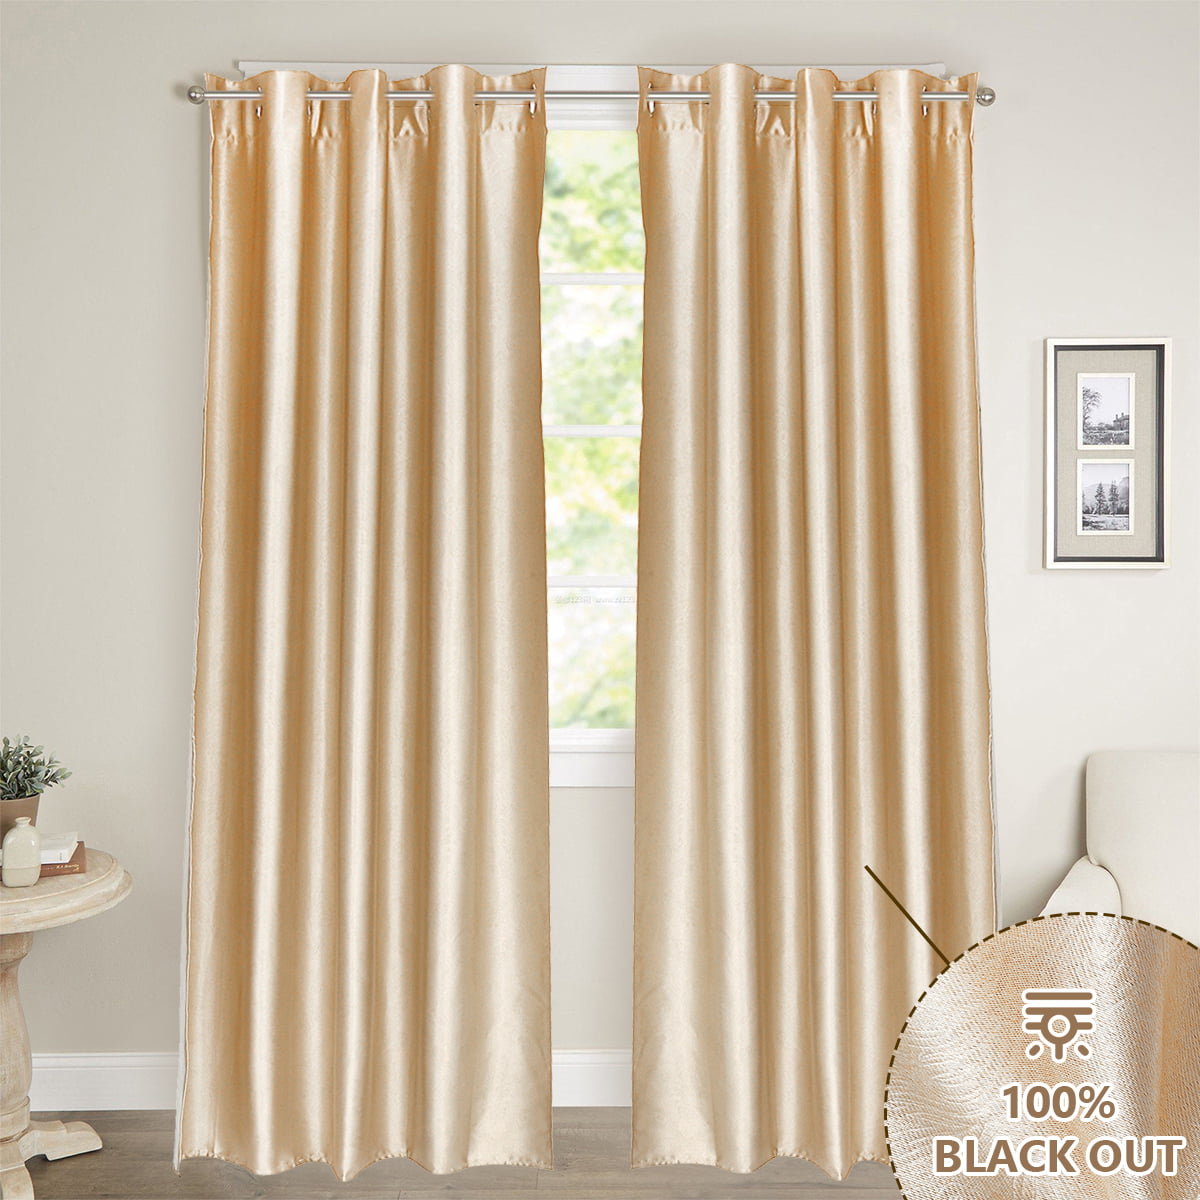 2 Panels 42x63" Willow Jacquard Thermal Insulated Blackout Drapes & Curtains 